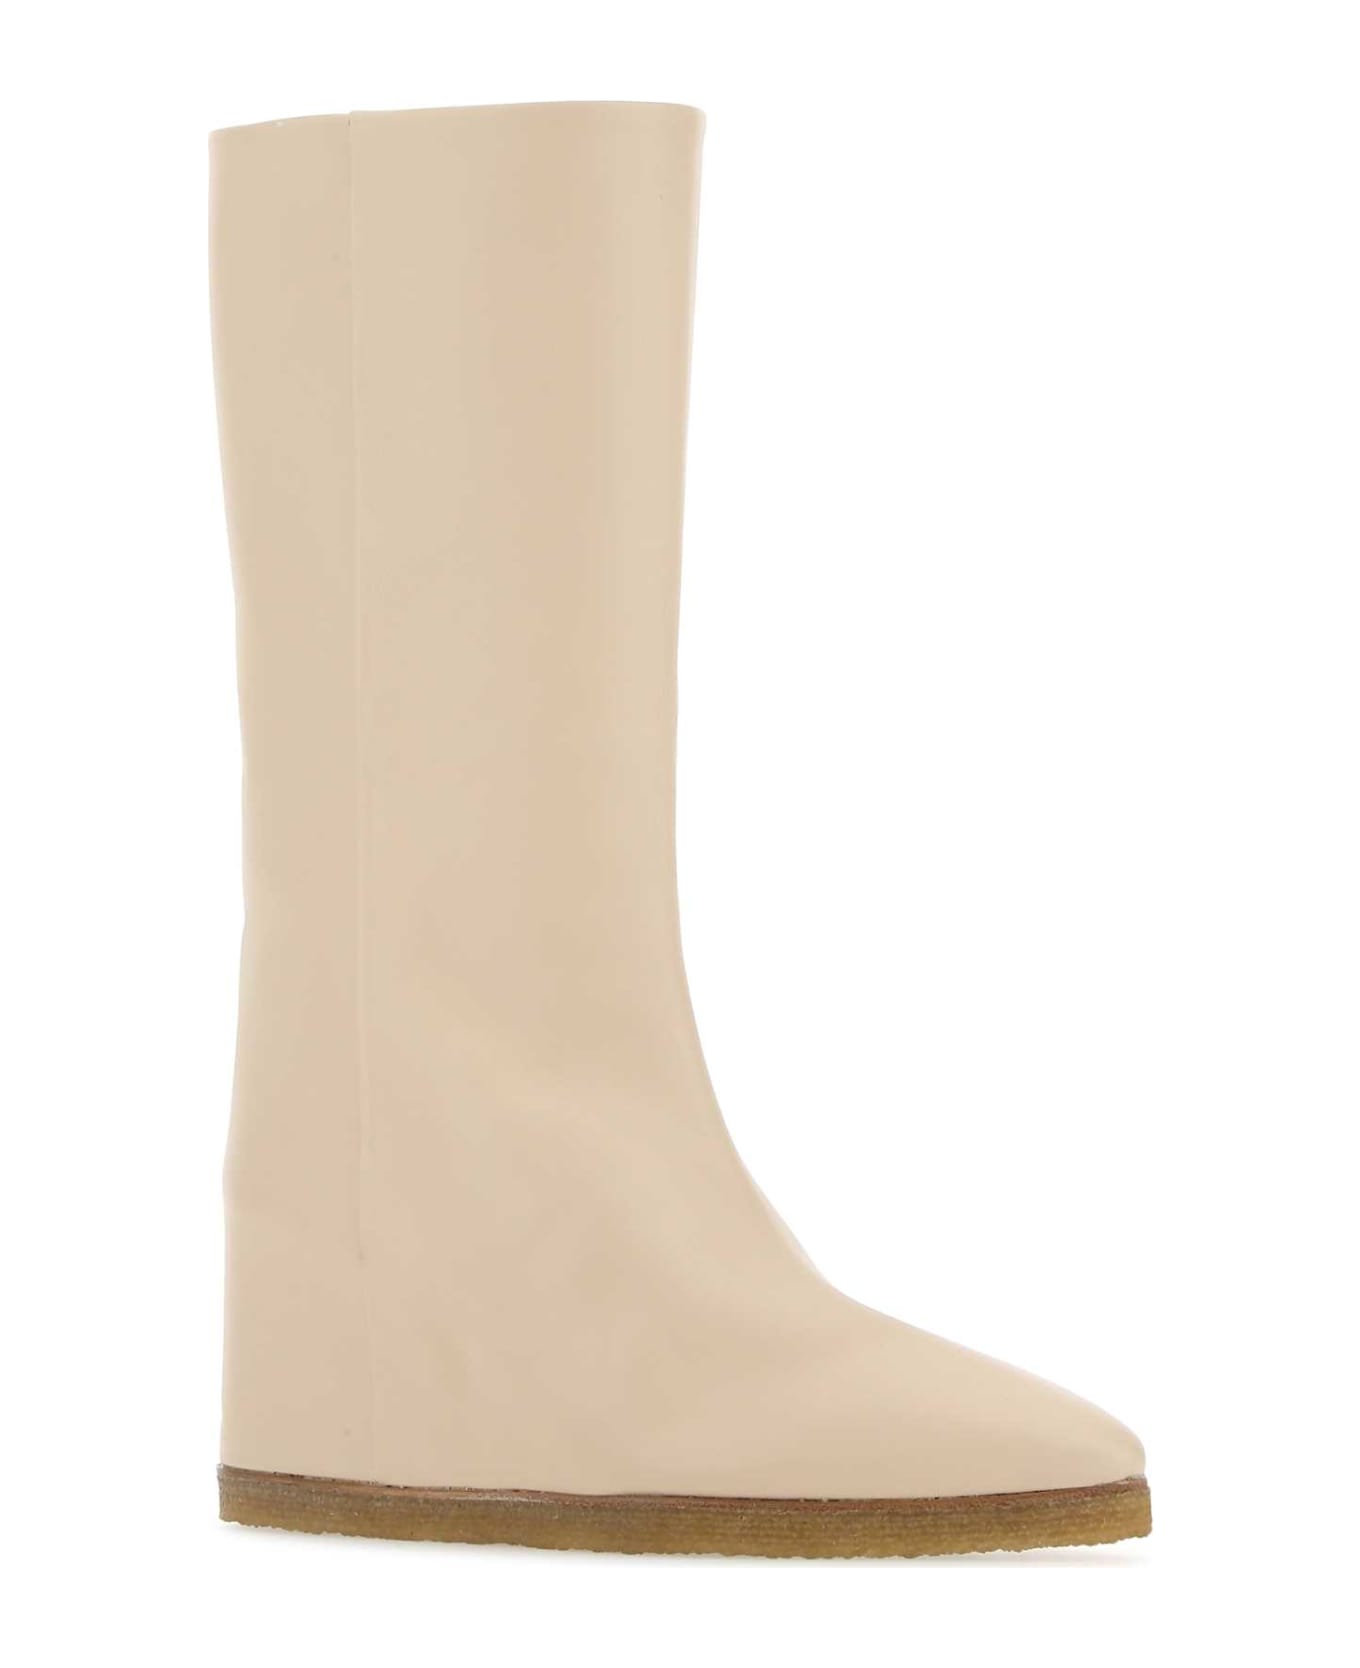 Chloé Sand Leather Moreen Boots - 278 ブーツ